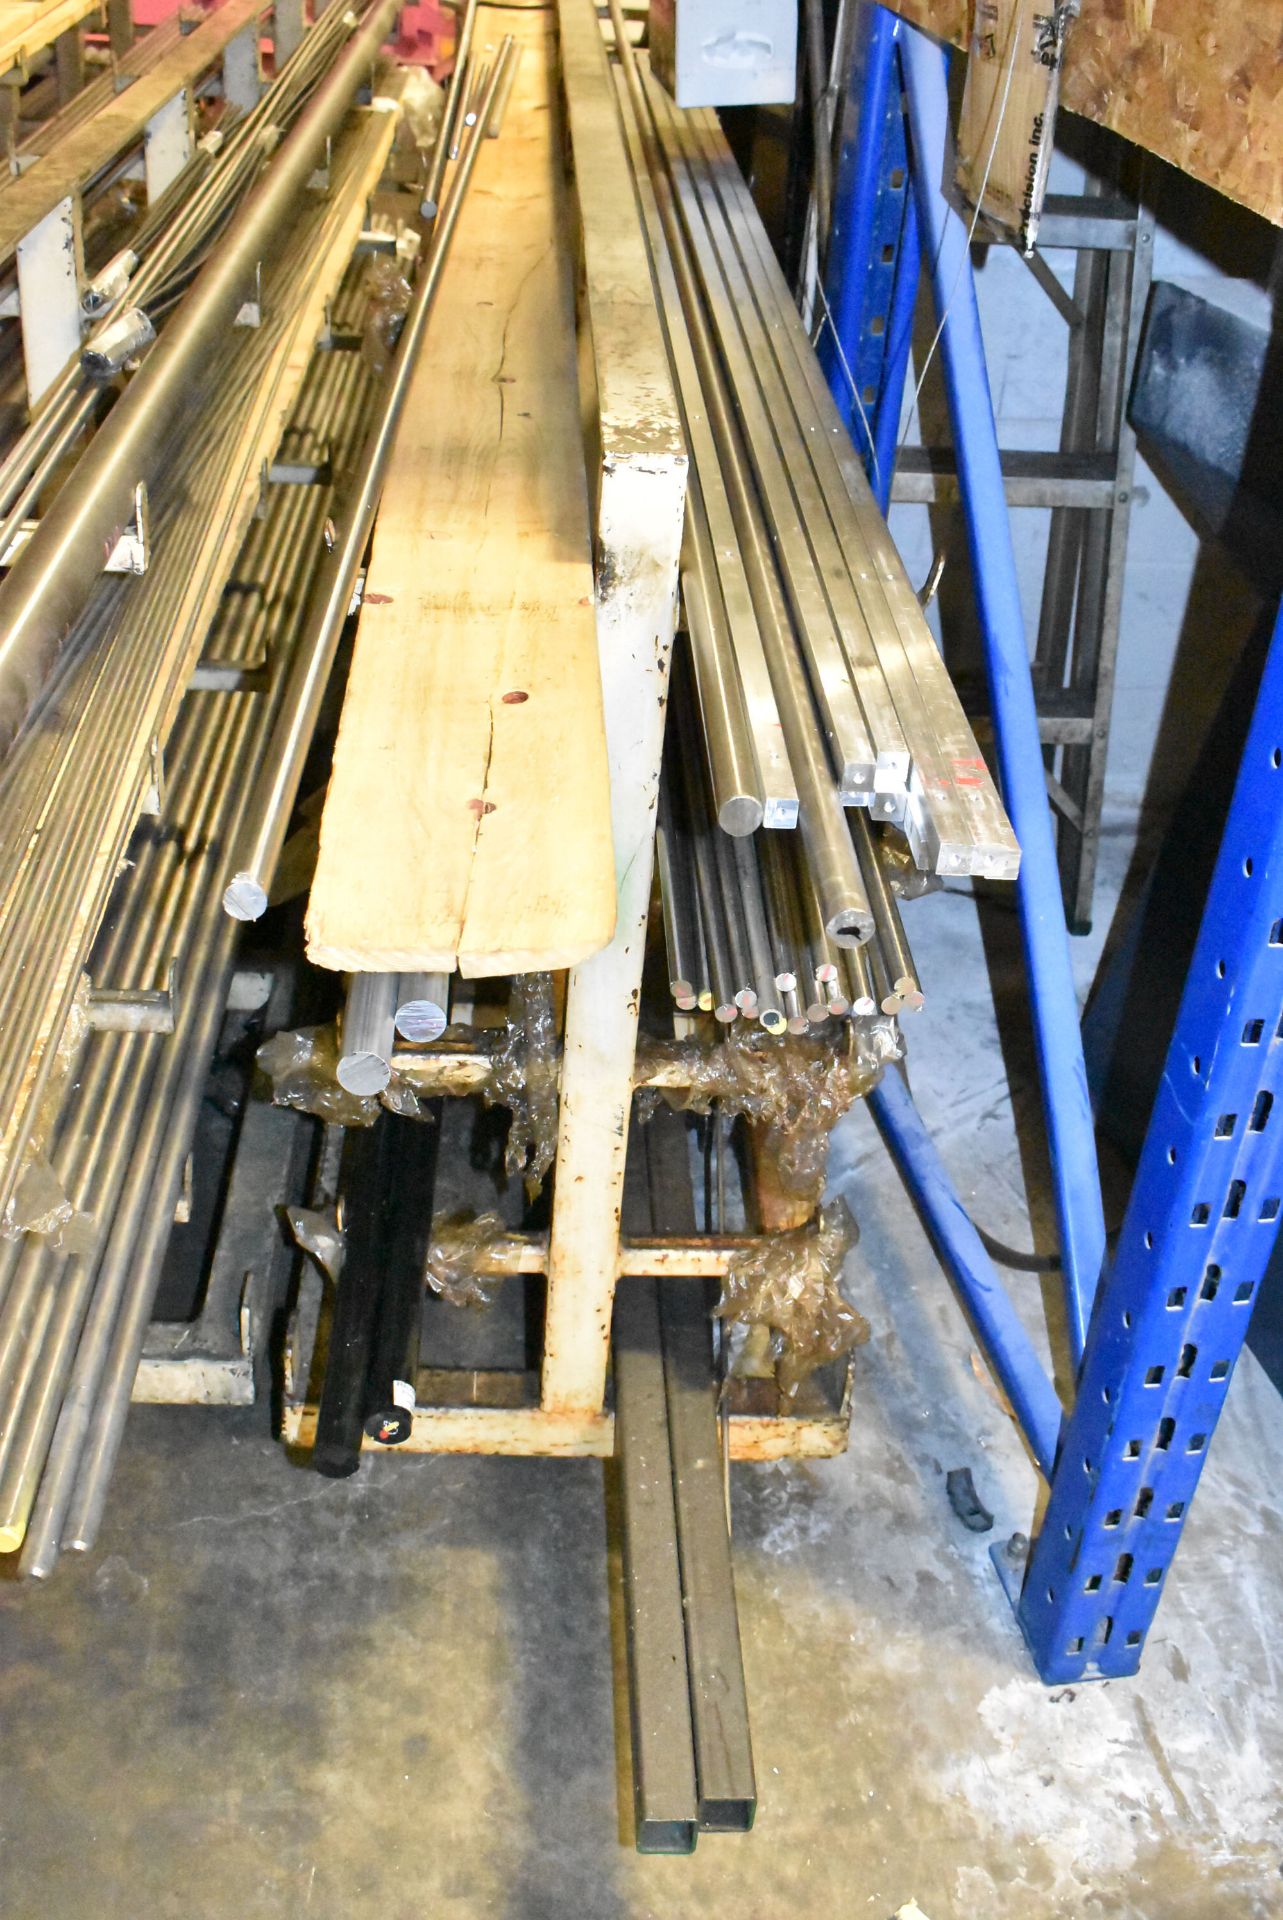 LOT/ CONTENTS OF (3) RACKS CONSISTING OF FERROUS AND NON-FERROUS BAR STOCK (RACKS NOT INCLUDED) - Image 4 of 5